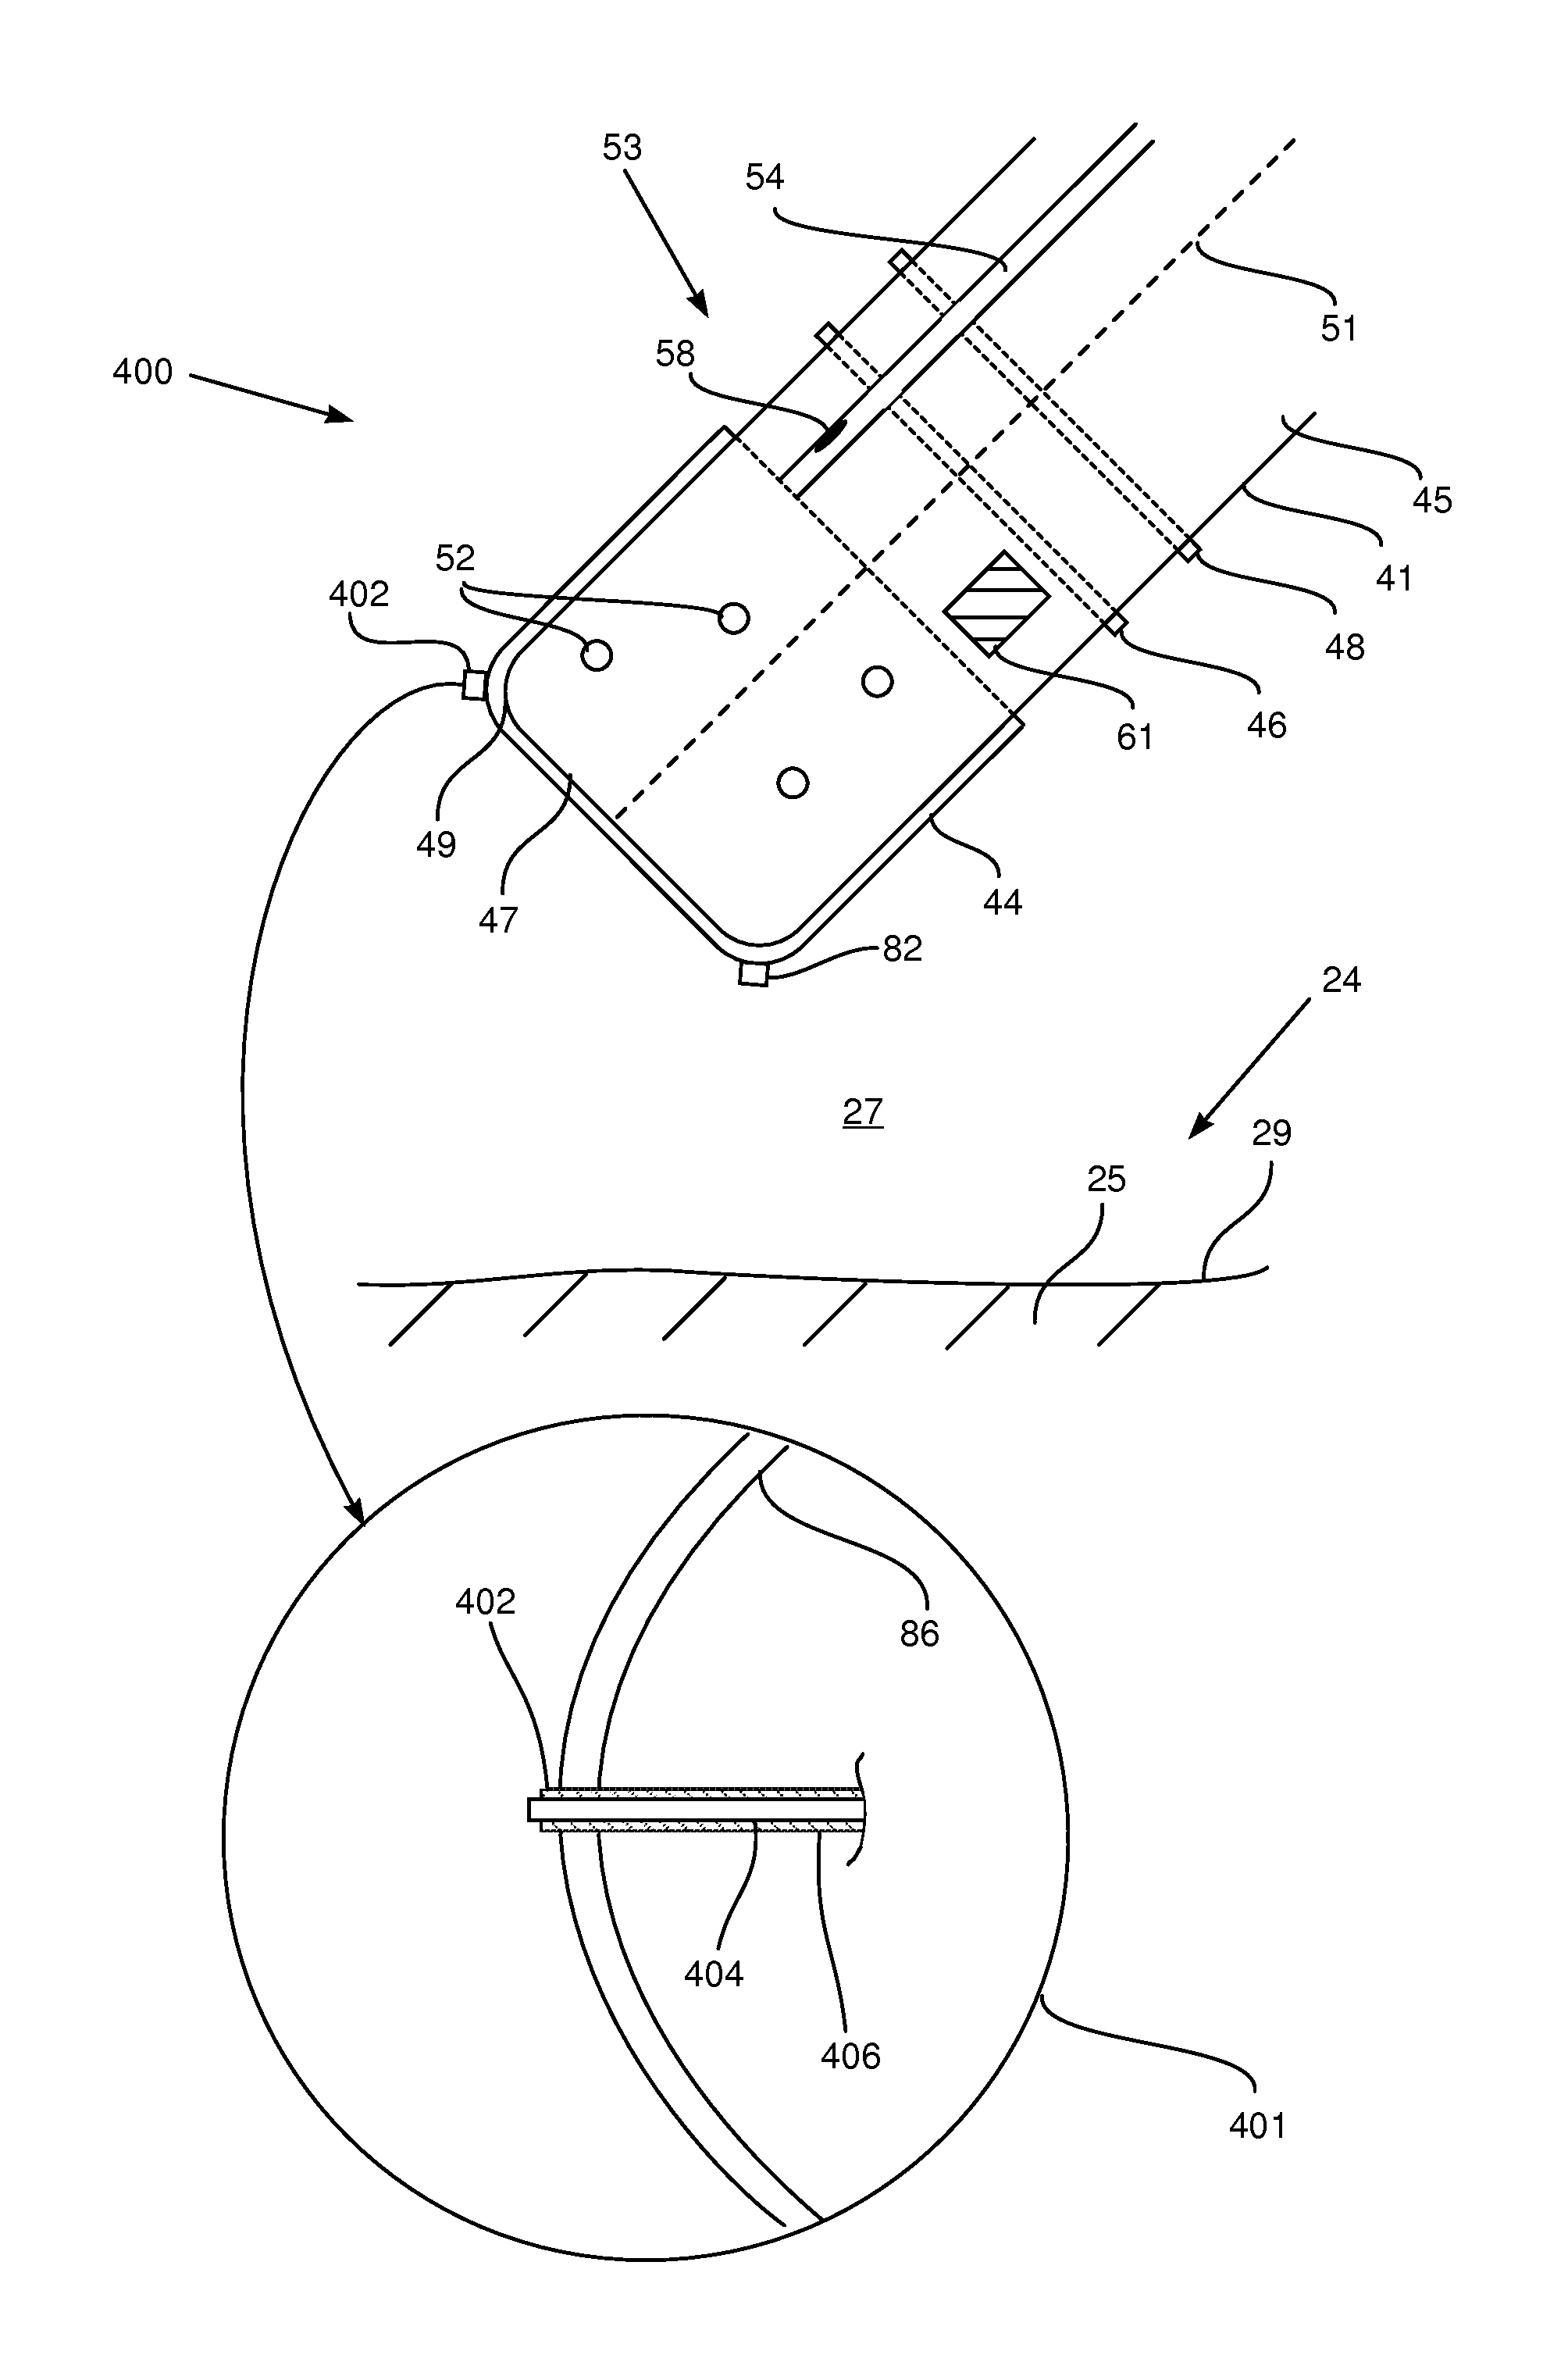 Monitoring tissue temperature while using an irrigated catheter